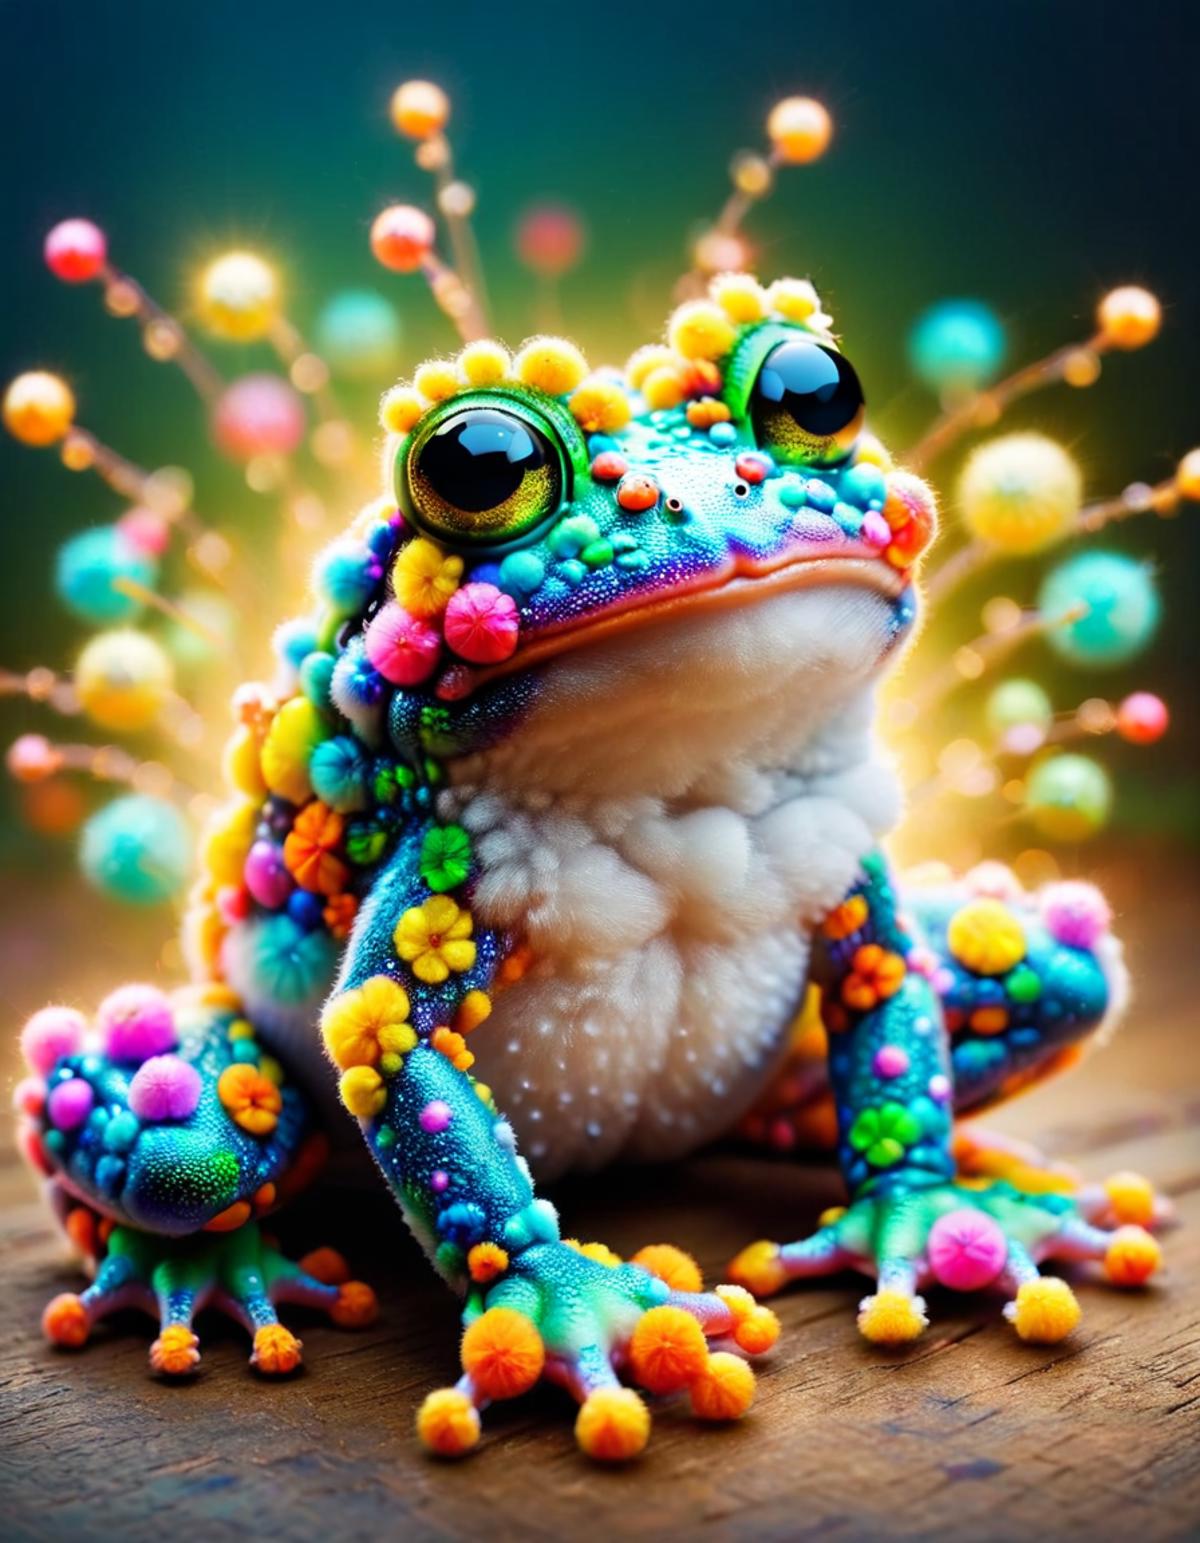 Colorful Frog with Pink and Yellow Spots on its Legs and Body.